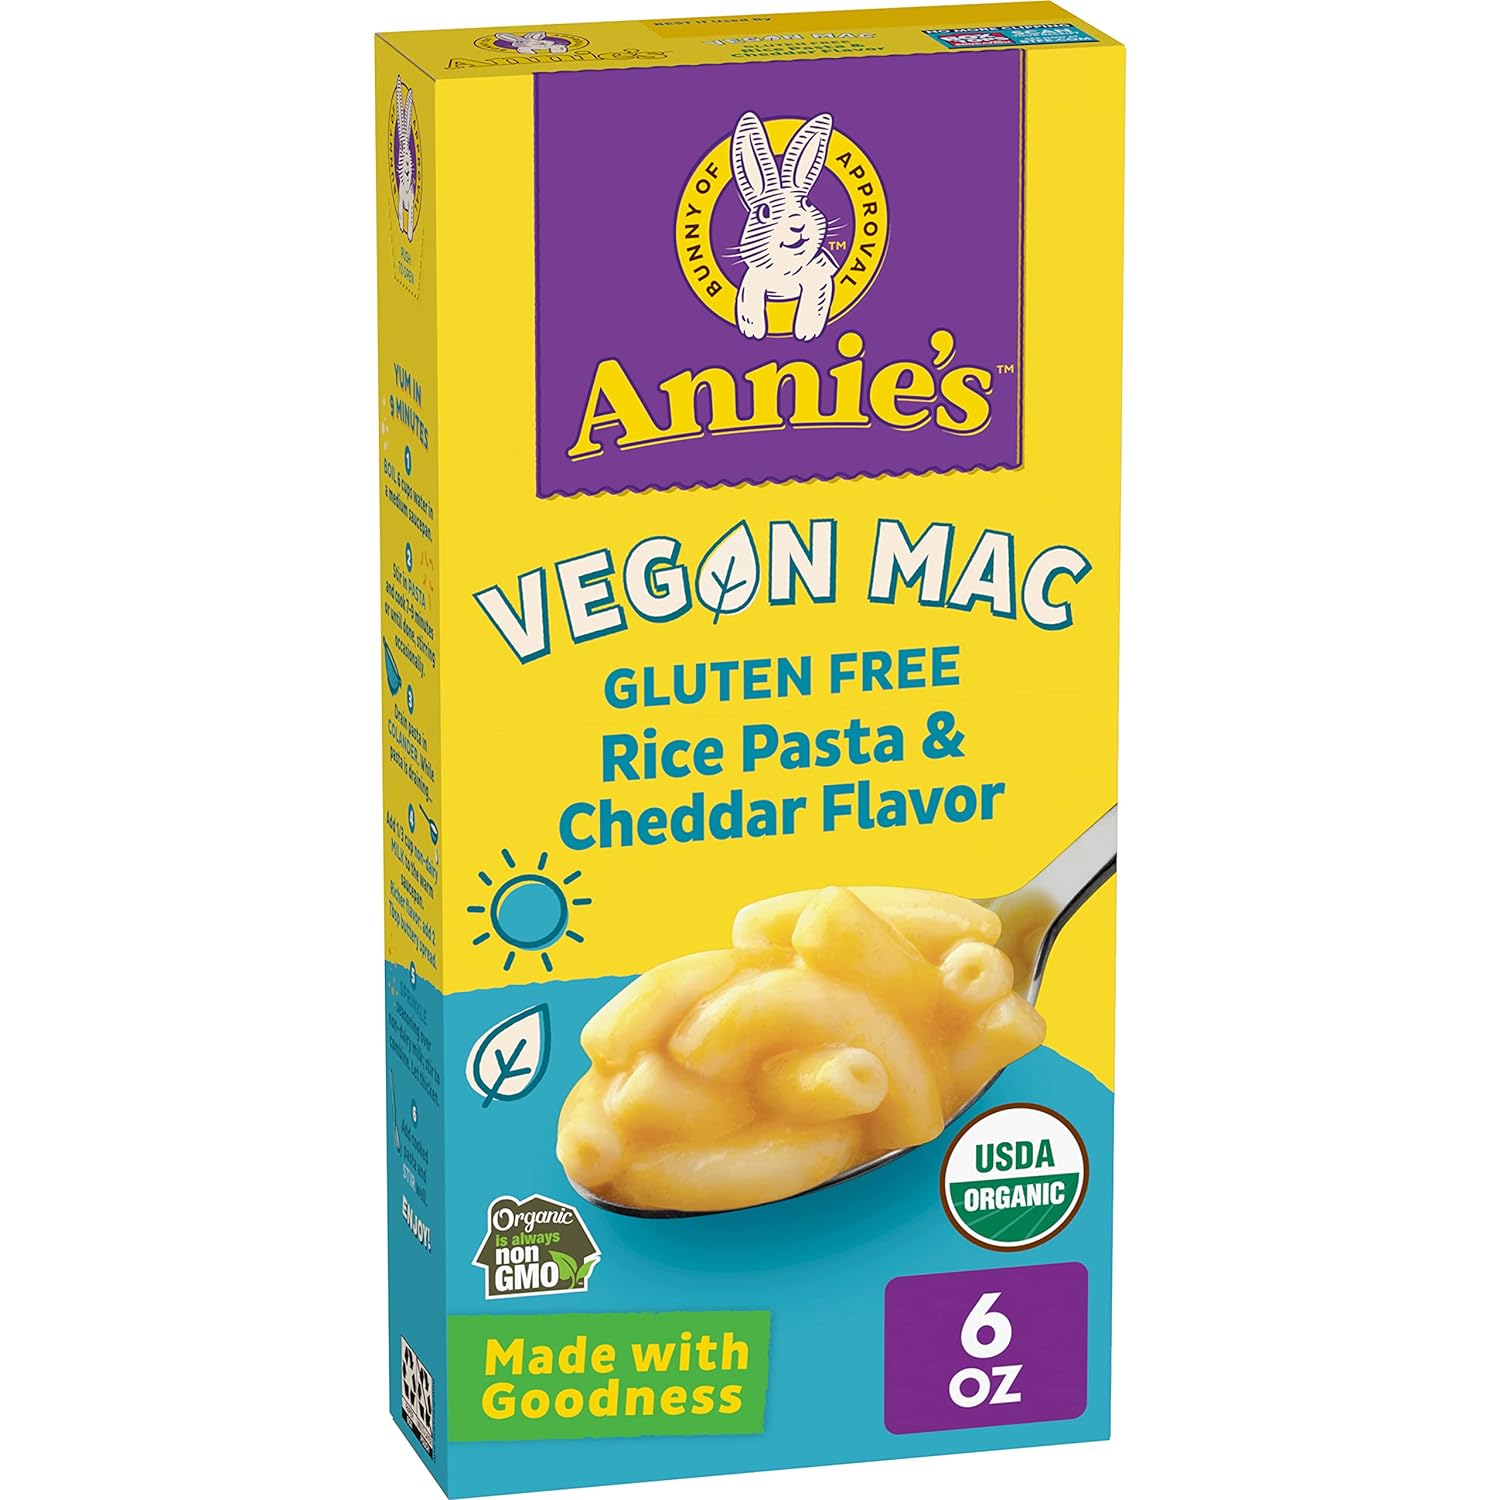 Annie’s Vegan Mac Rice Pasta and Cheddar Flavor Dinner with Organic Gl6.1 Ounces